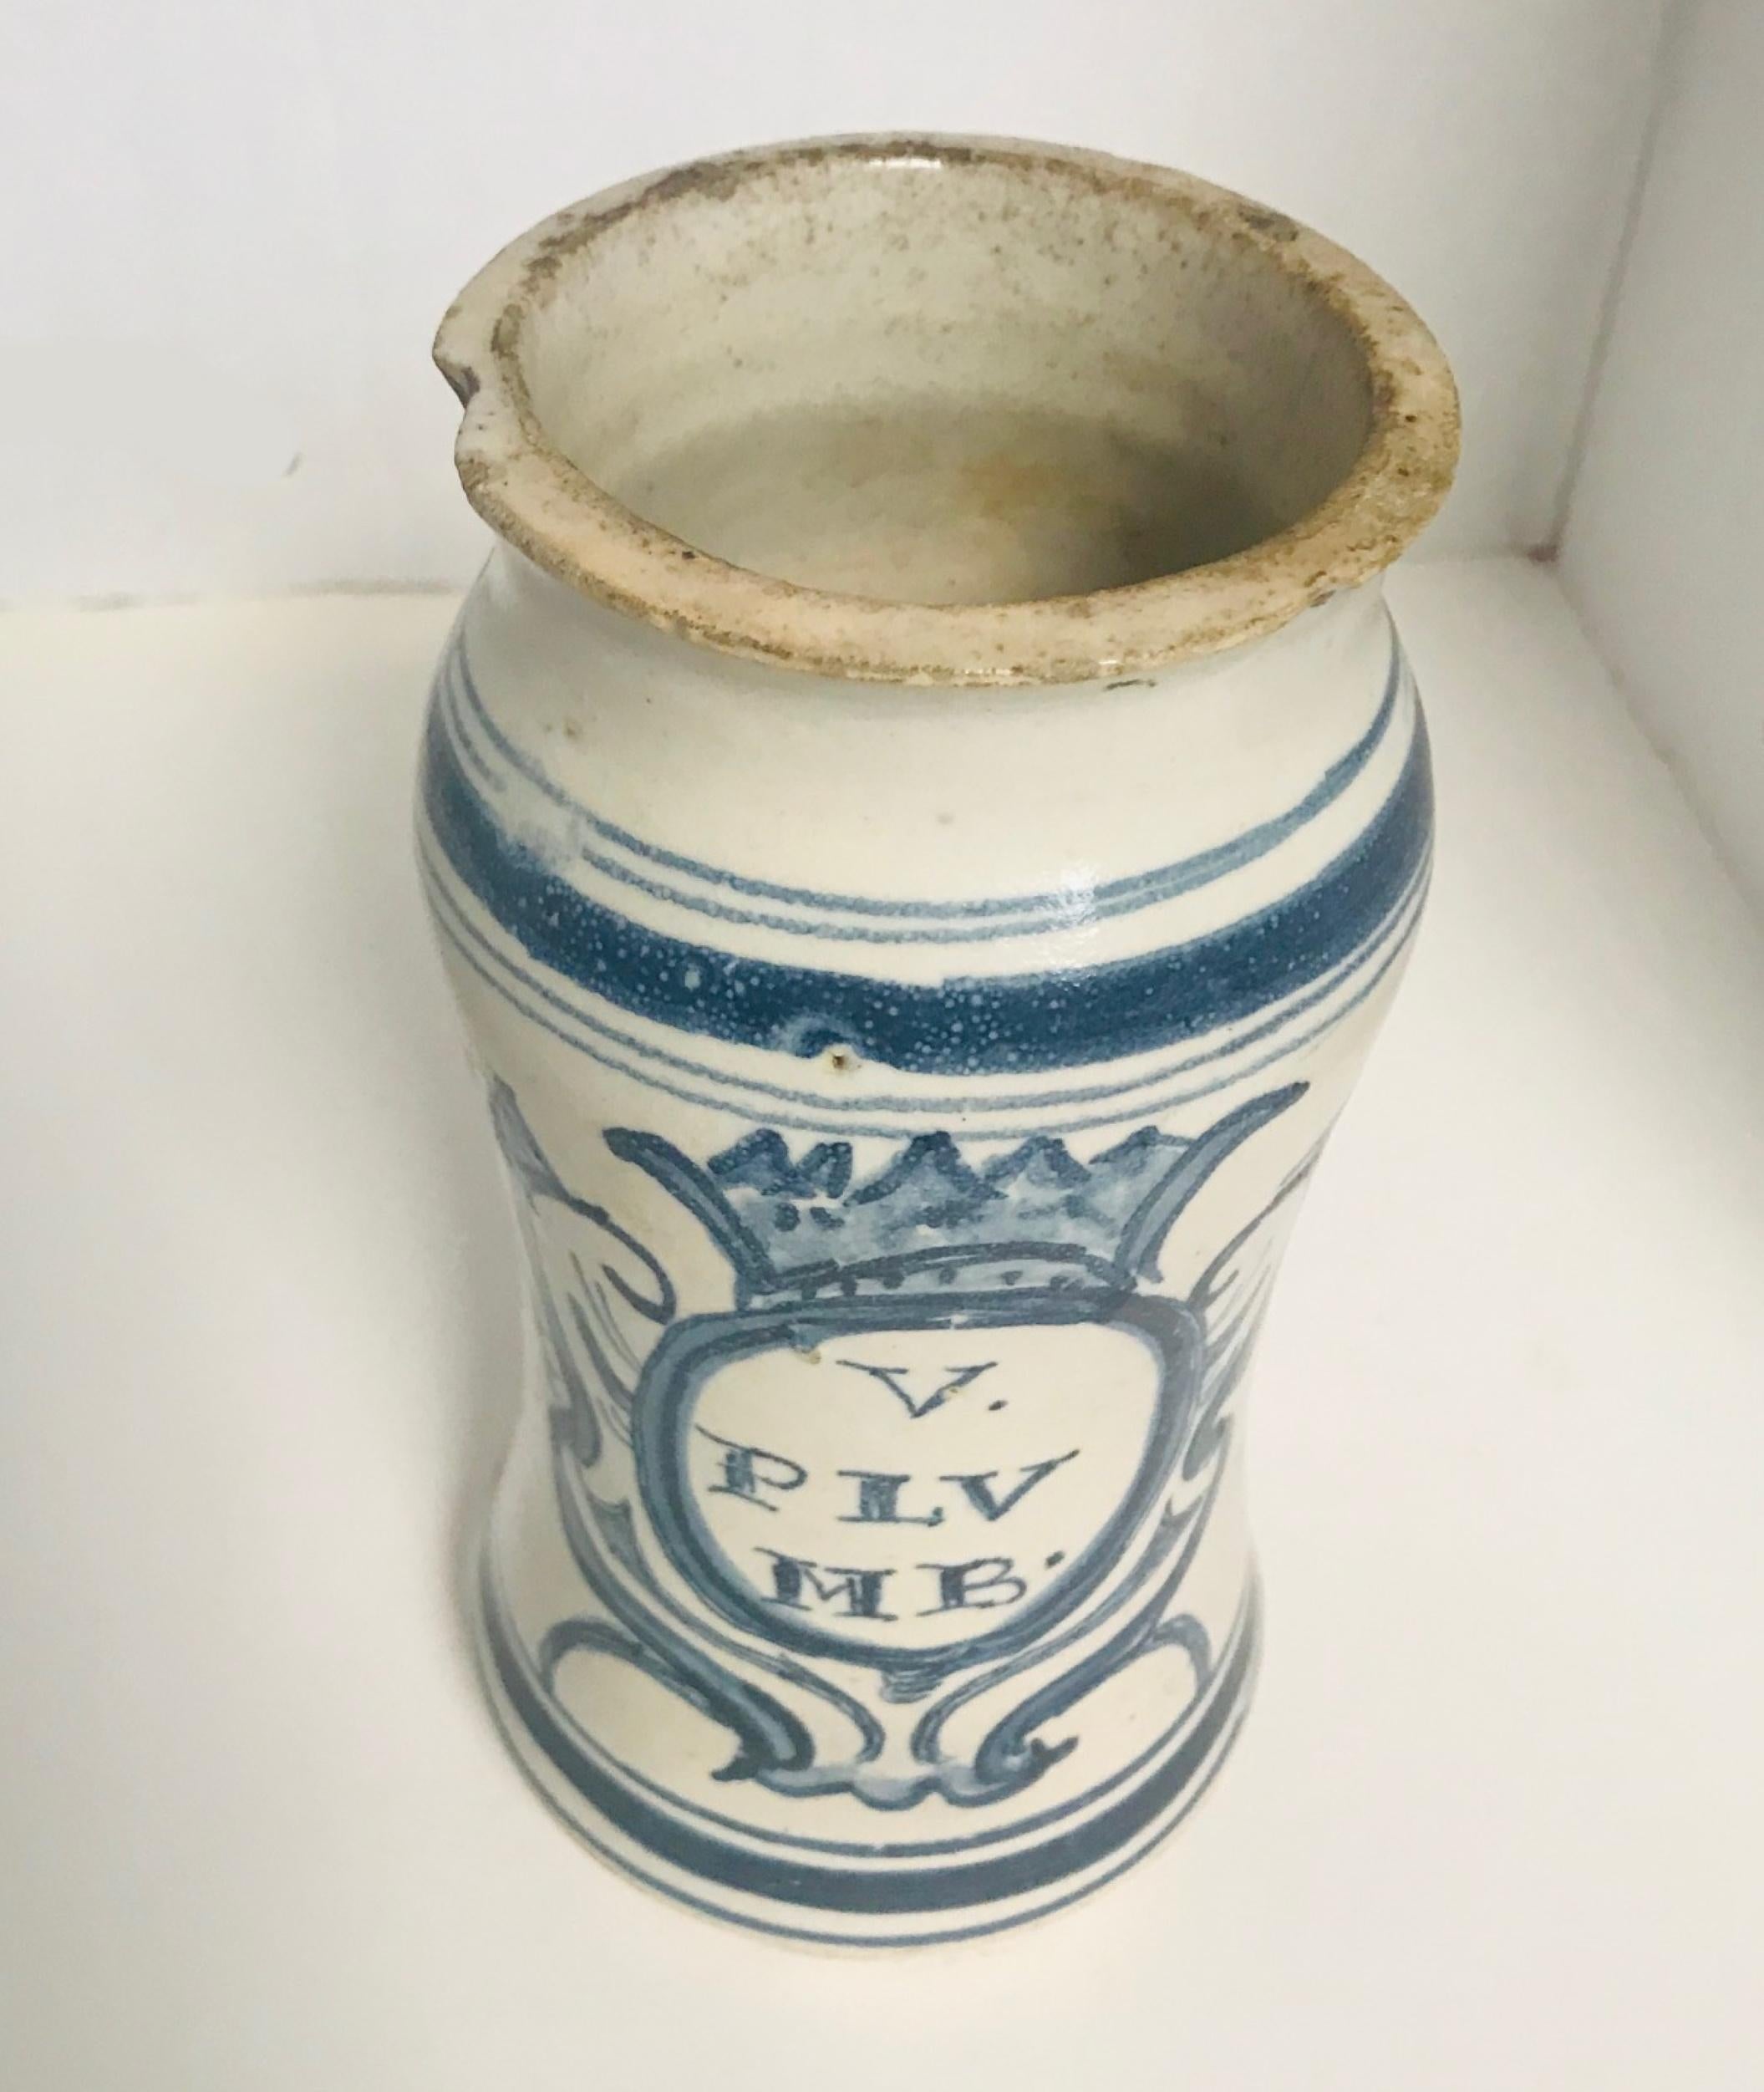 17th century Italian Majolica Albarello Apothecary jar

Antique albarello from the 17th century Italy served both functional and decorative purposes. This one is embellished with a hand painted blue design over a white ground. The storage vessel